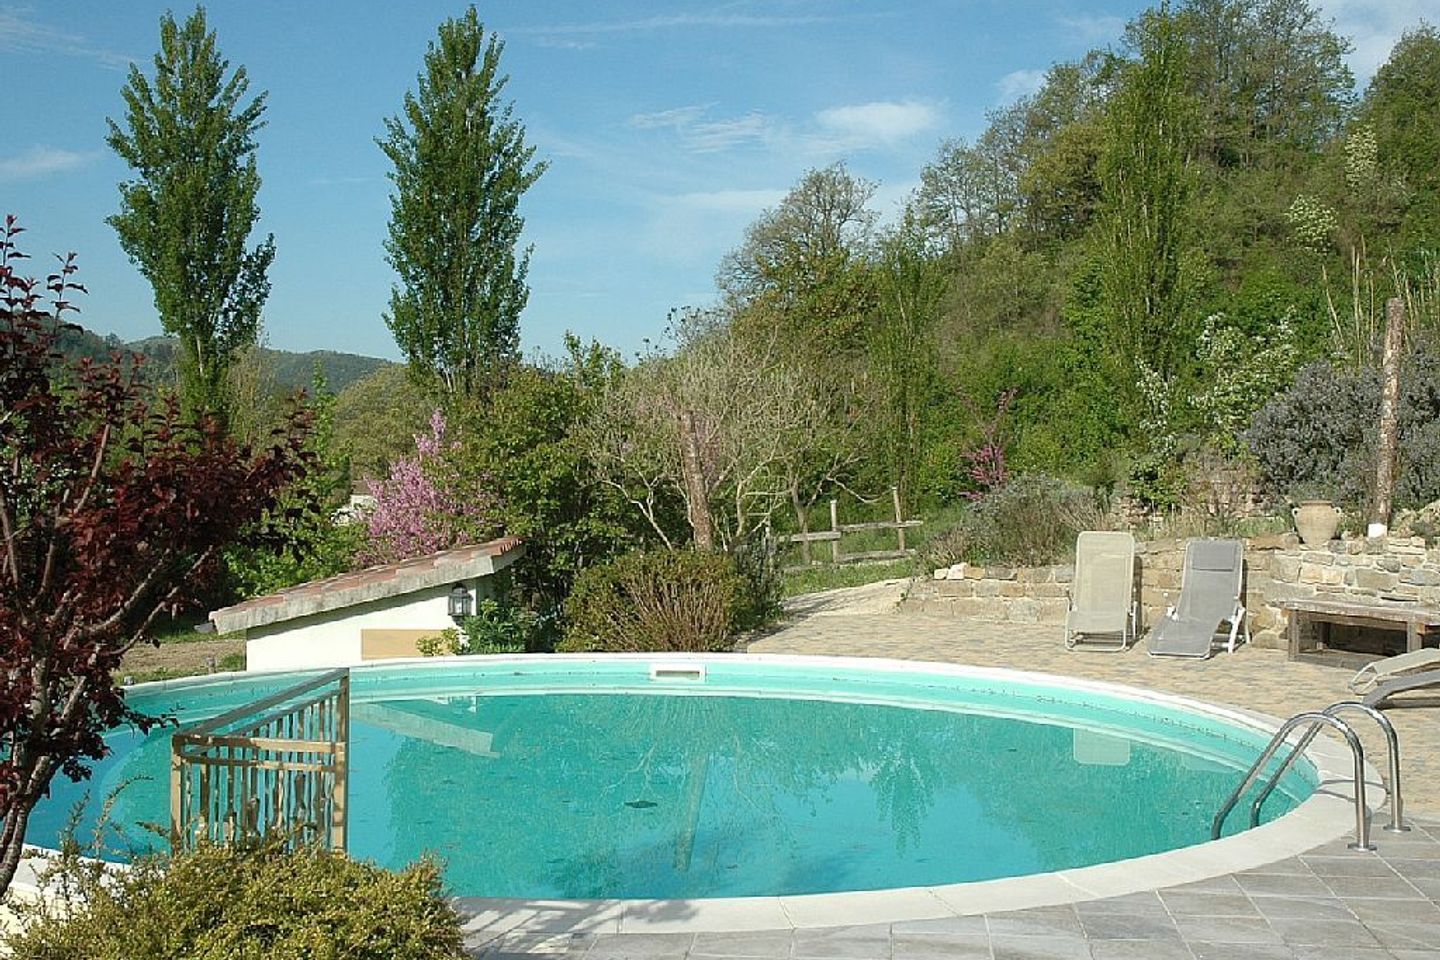 Stunning 8 Bedroom Farmhouse And Vineyard For Sale In Umbria Italy, Umbria, Italy